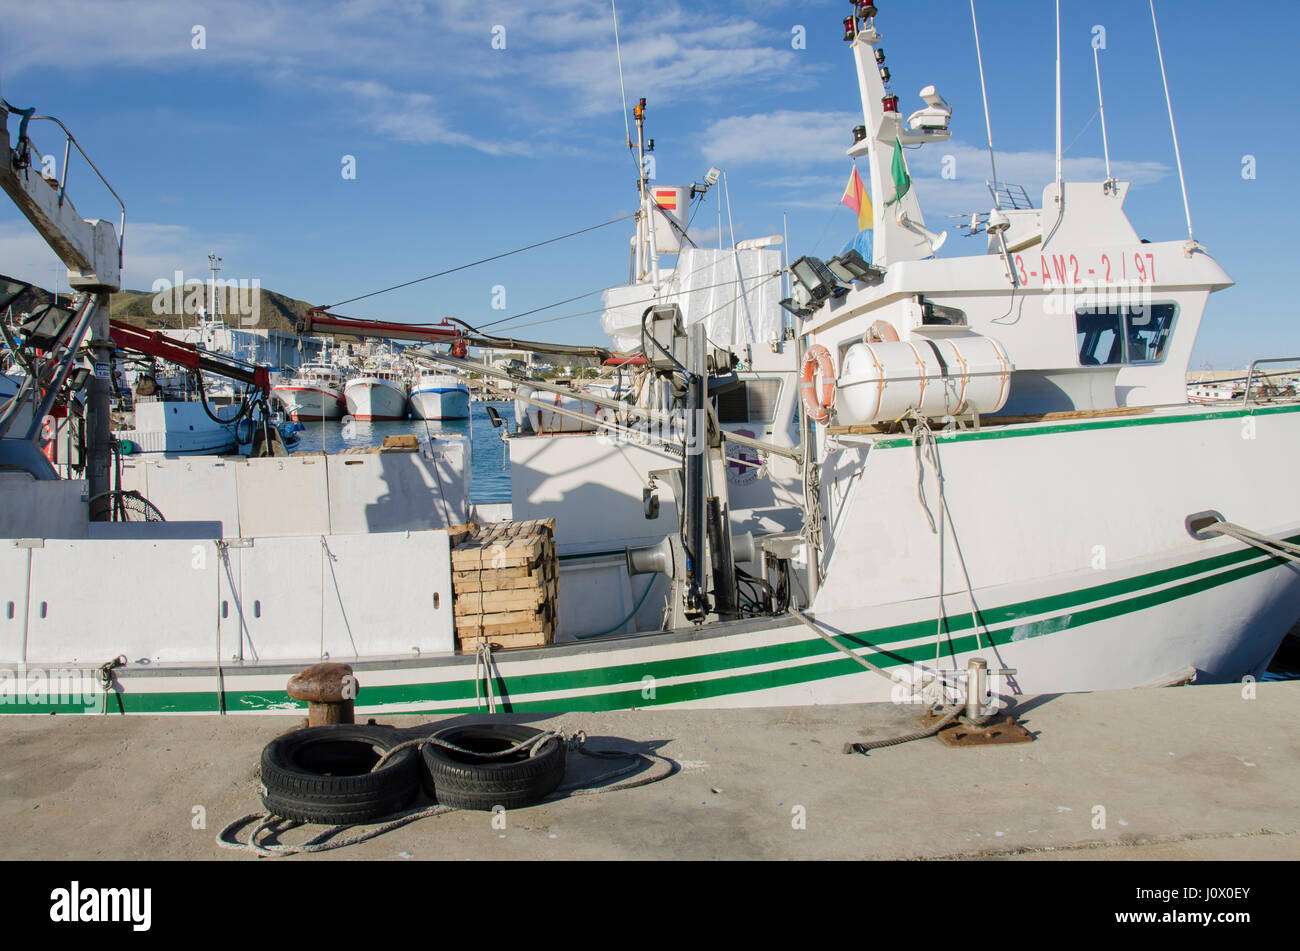 A green boat view in the Carboneras port, Almería province, Spain. Stock Photo